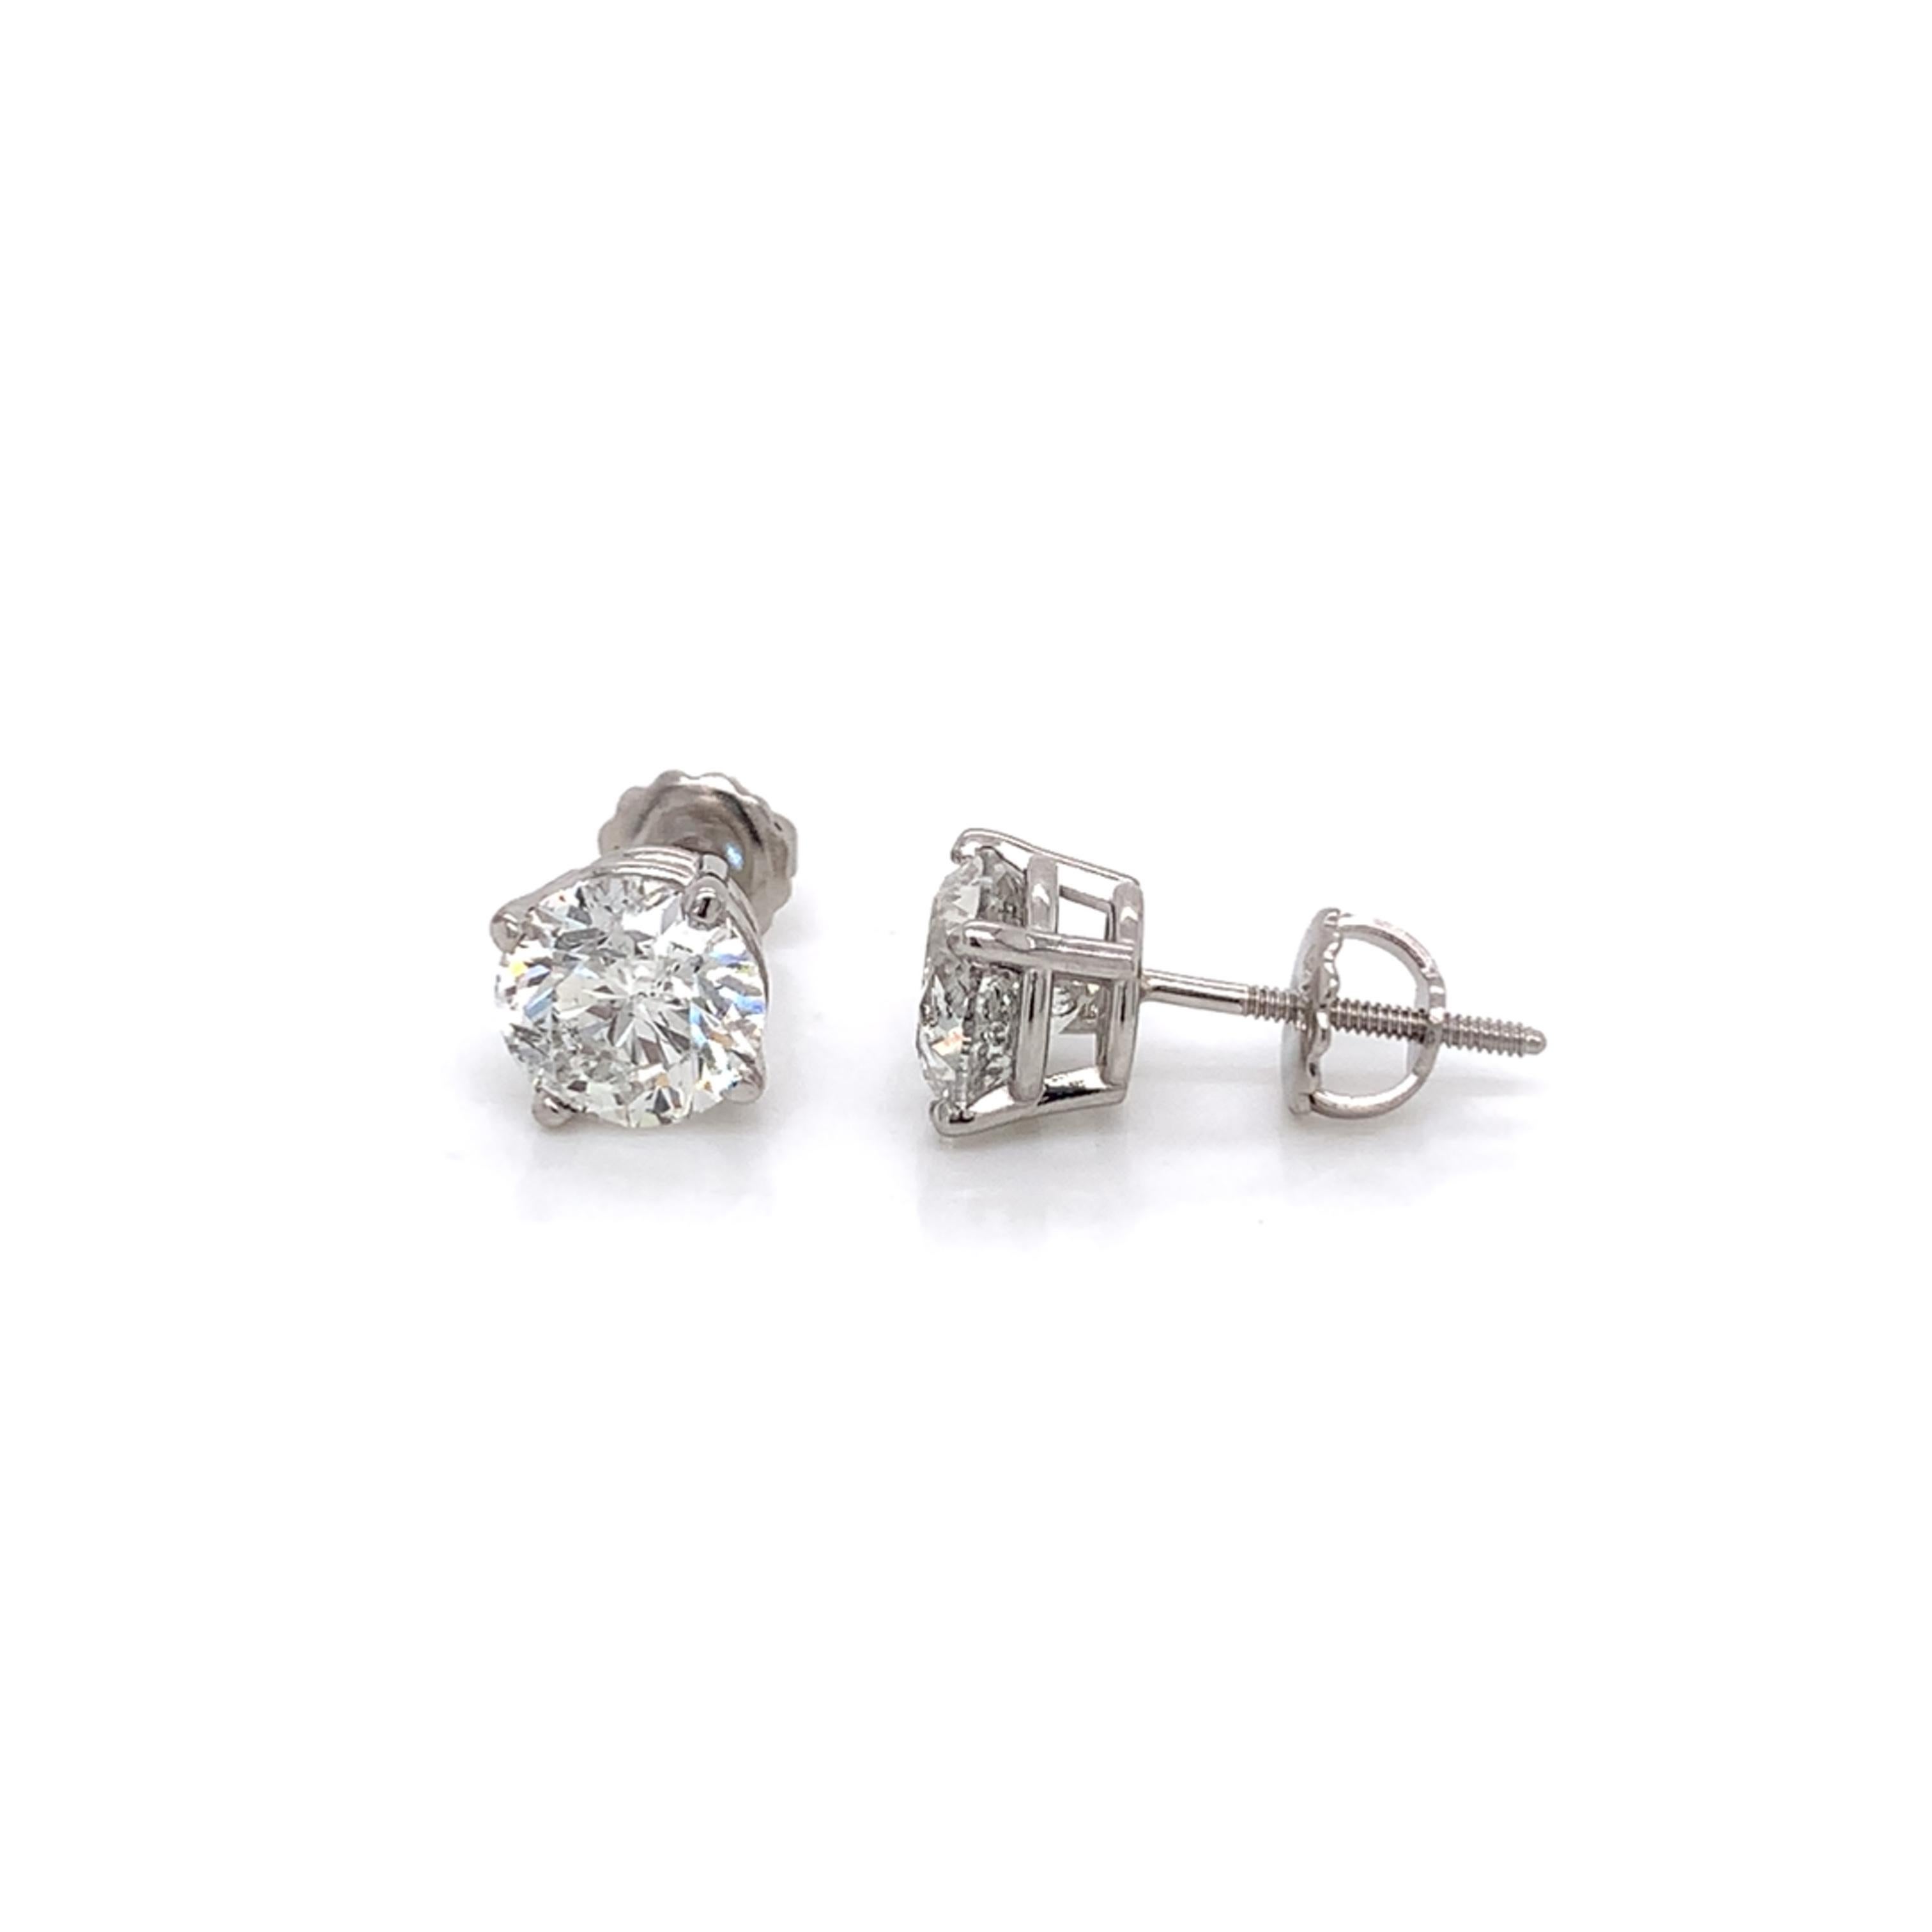 3.00 Carat Diamond Stud earrings made with real/natural brilliant cut diamonds. Total Diamond Weight: 3.12 carats. Diamond Quantity: 2 round diamonds. Color: G-H Clarity: SI3-I1. Mounted on 18kt white gold screw back setting.